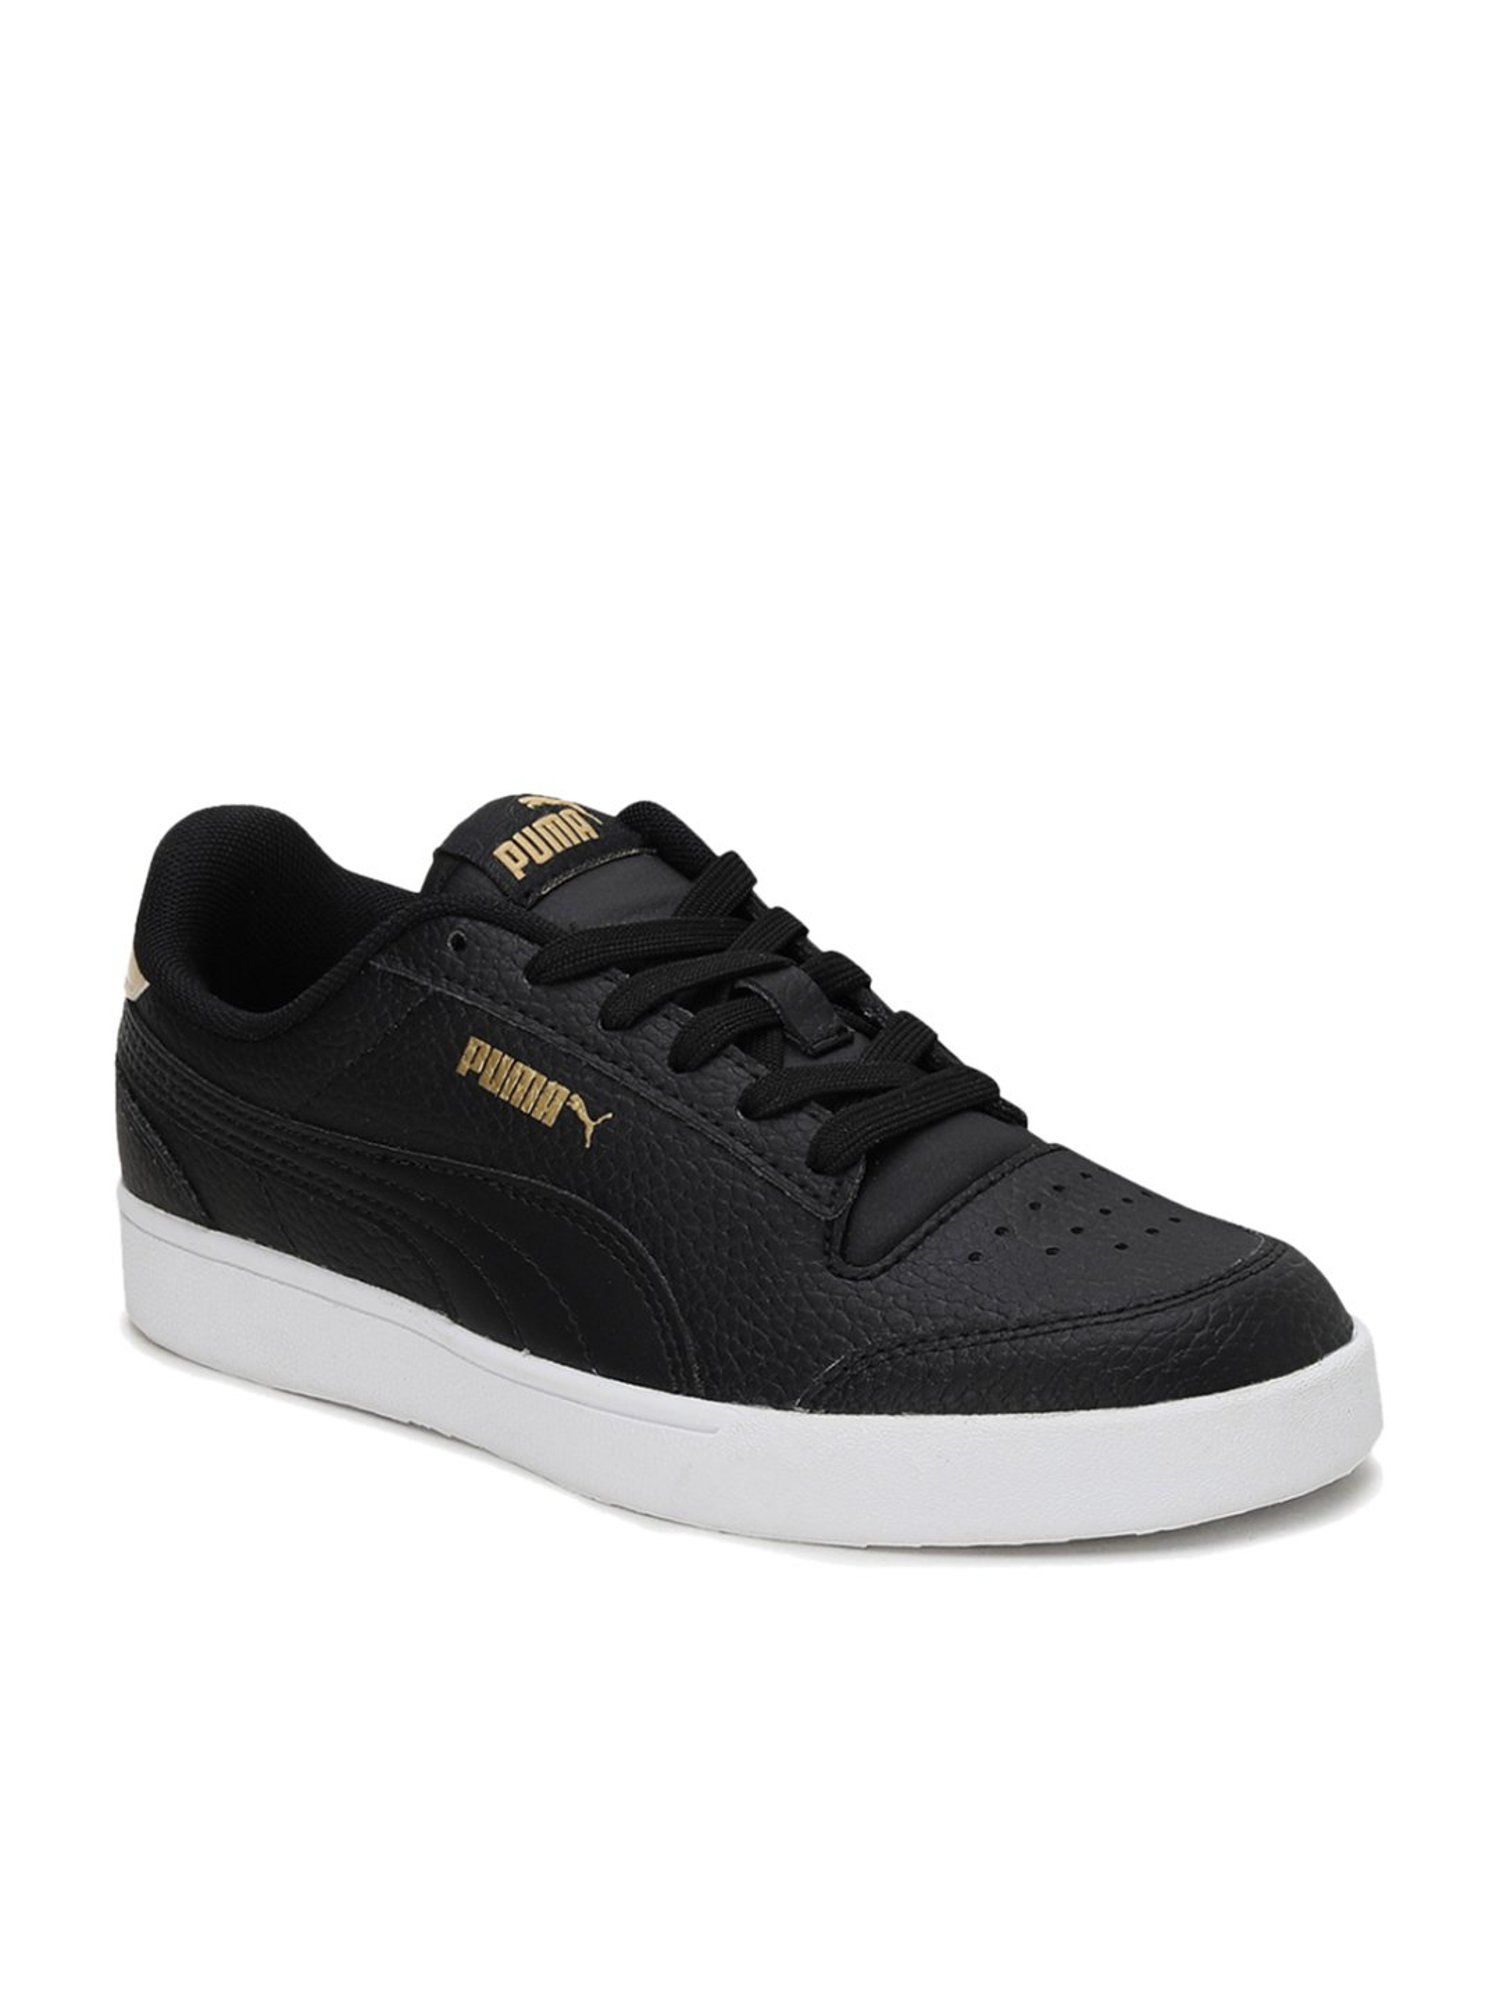 Buy Puma Women's Off Sneakers for Women at Best Price @ Tata CLiQ